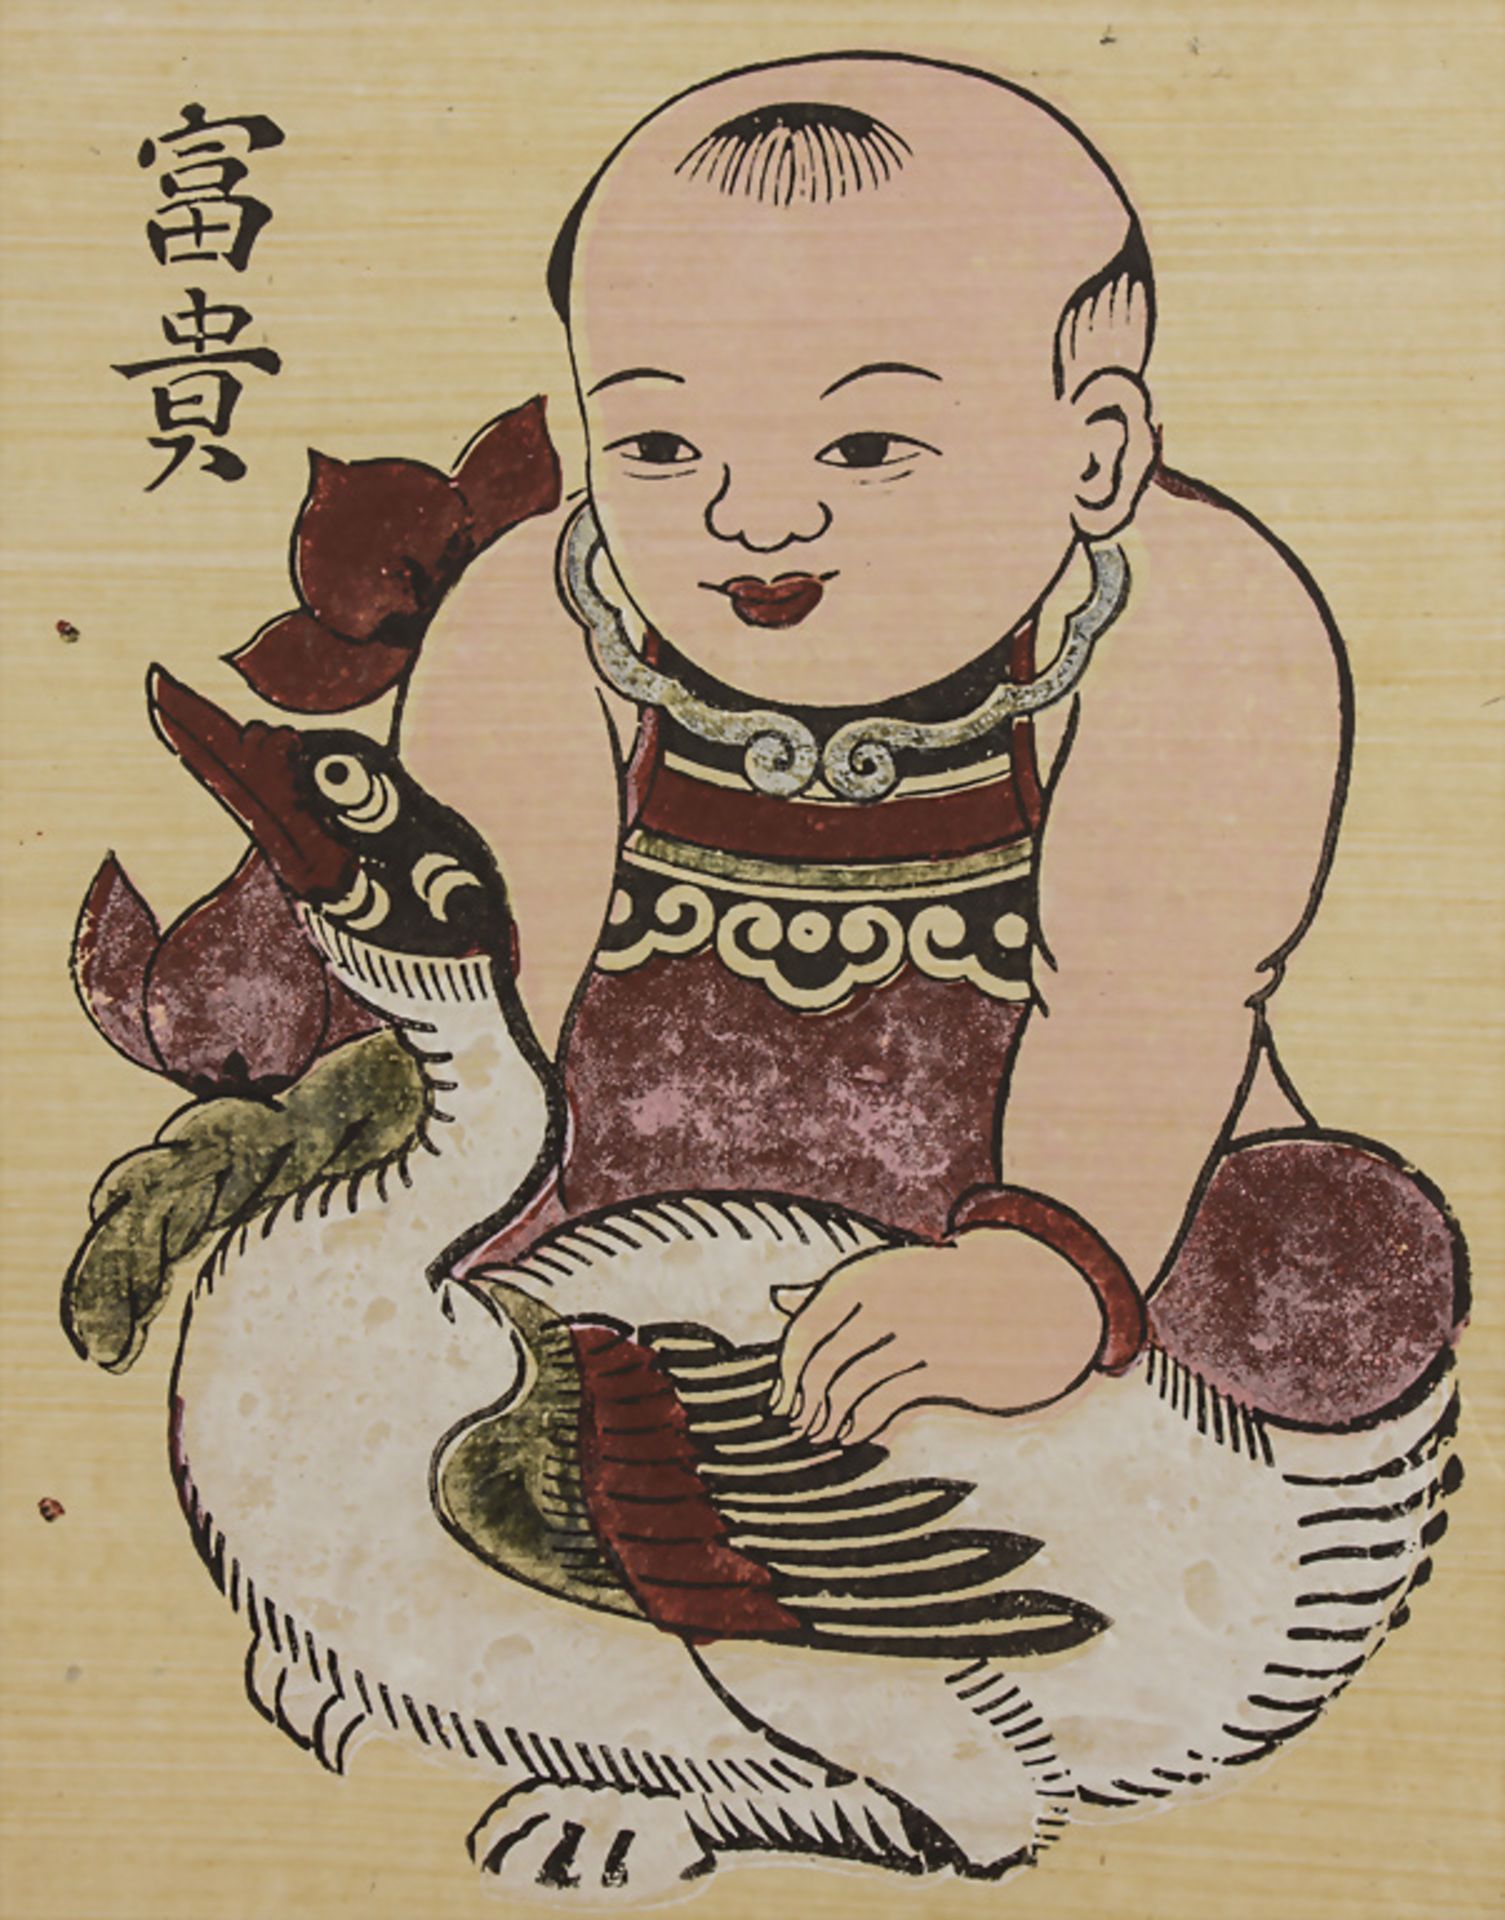 Japanholzschnitt 'Junge mit Ente' / A Japanese woodcut 'A boy with a duck', Japan